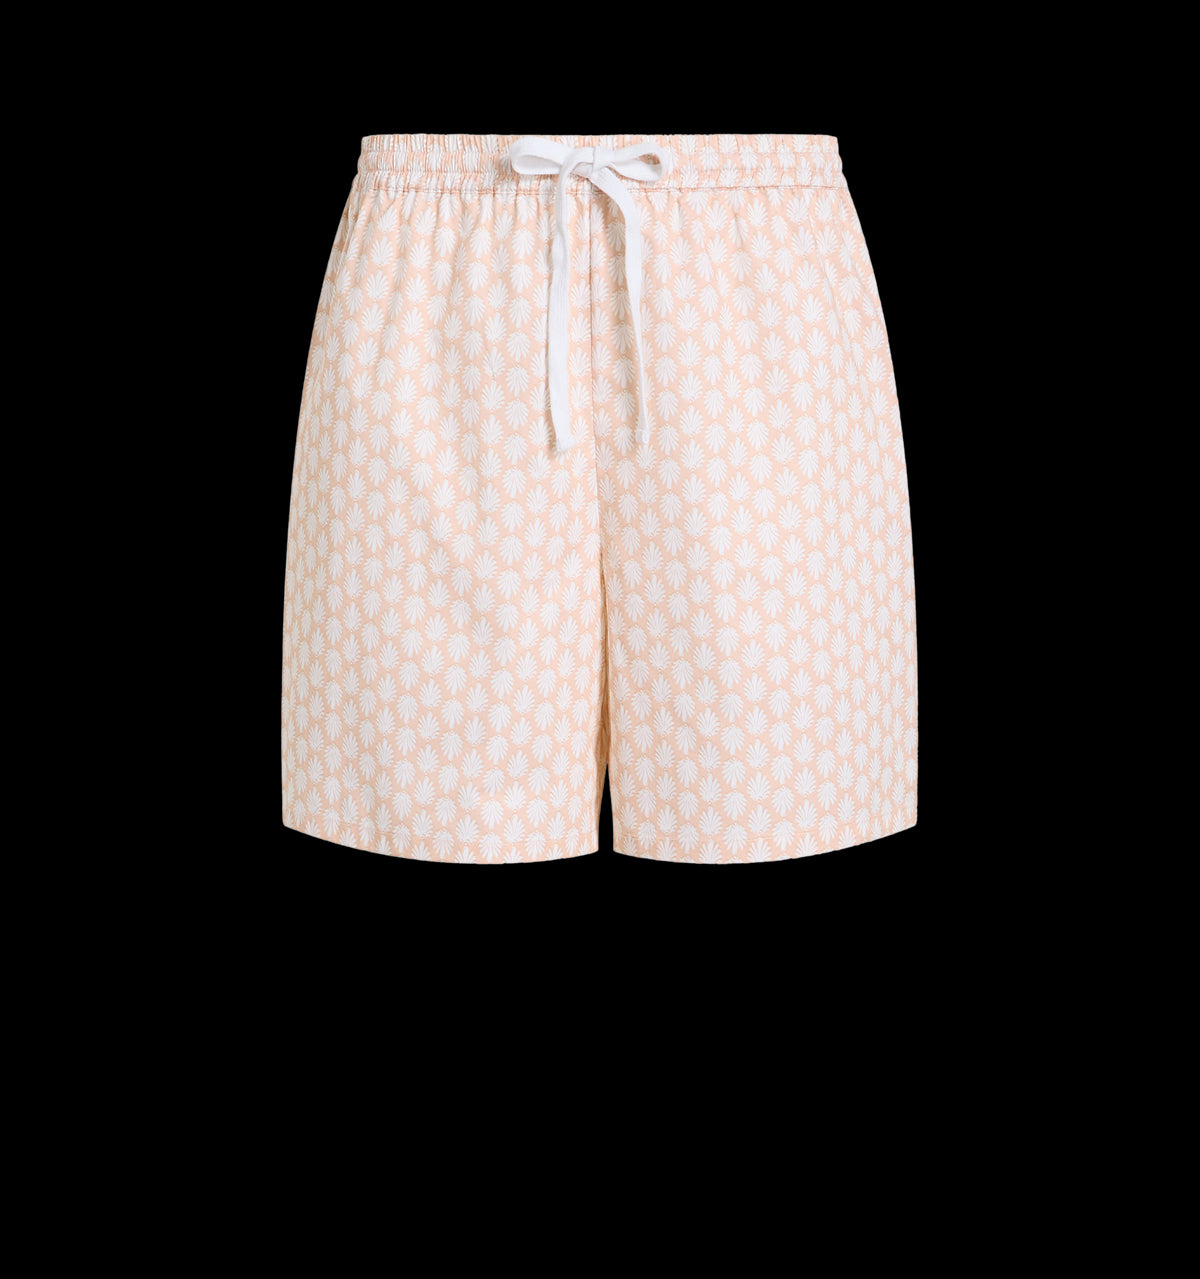 The Leo Short in Pale Coral Baroque Shell Cotton Sateen